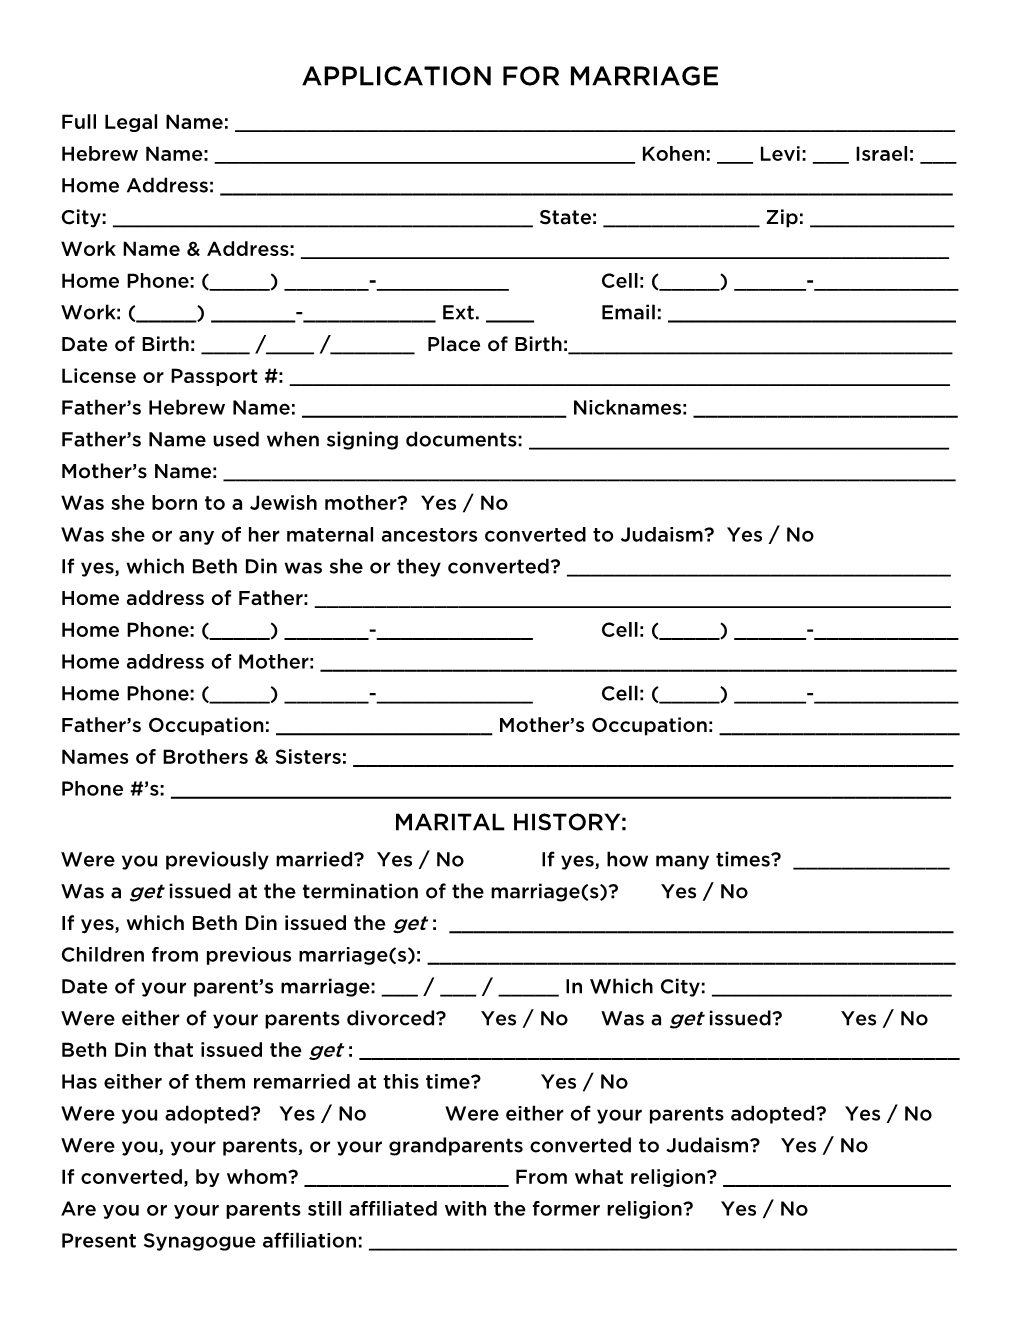 Application for Marriage